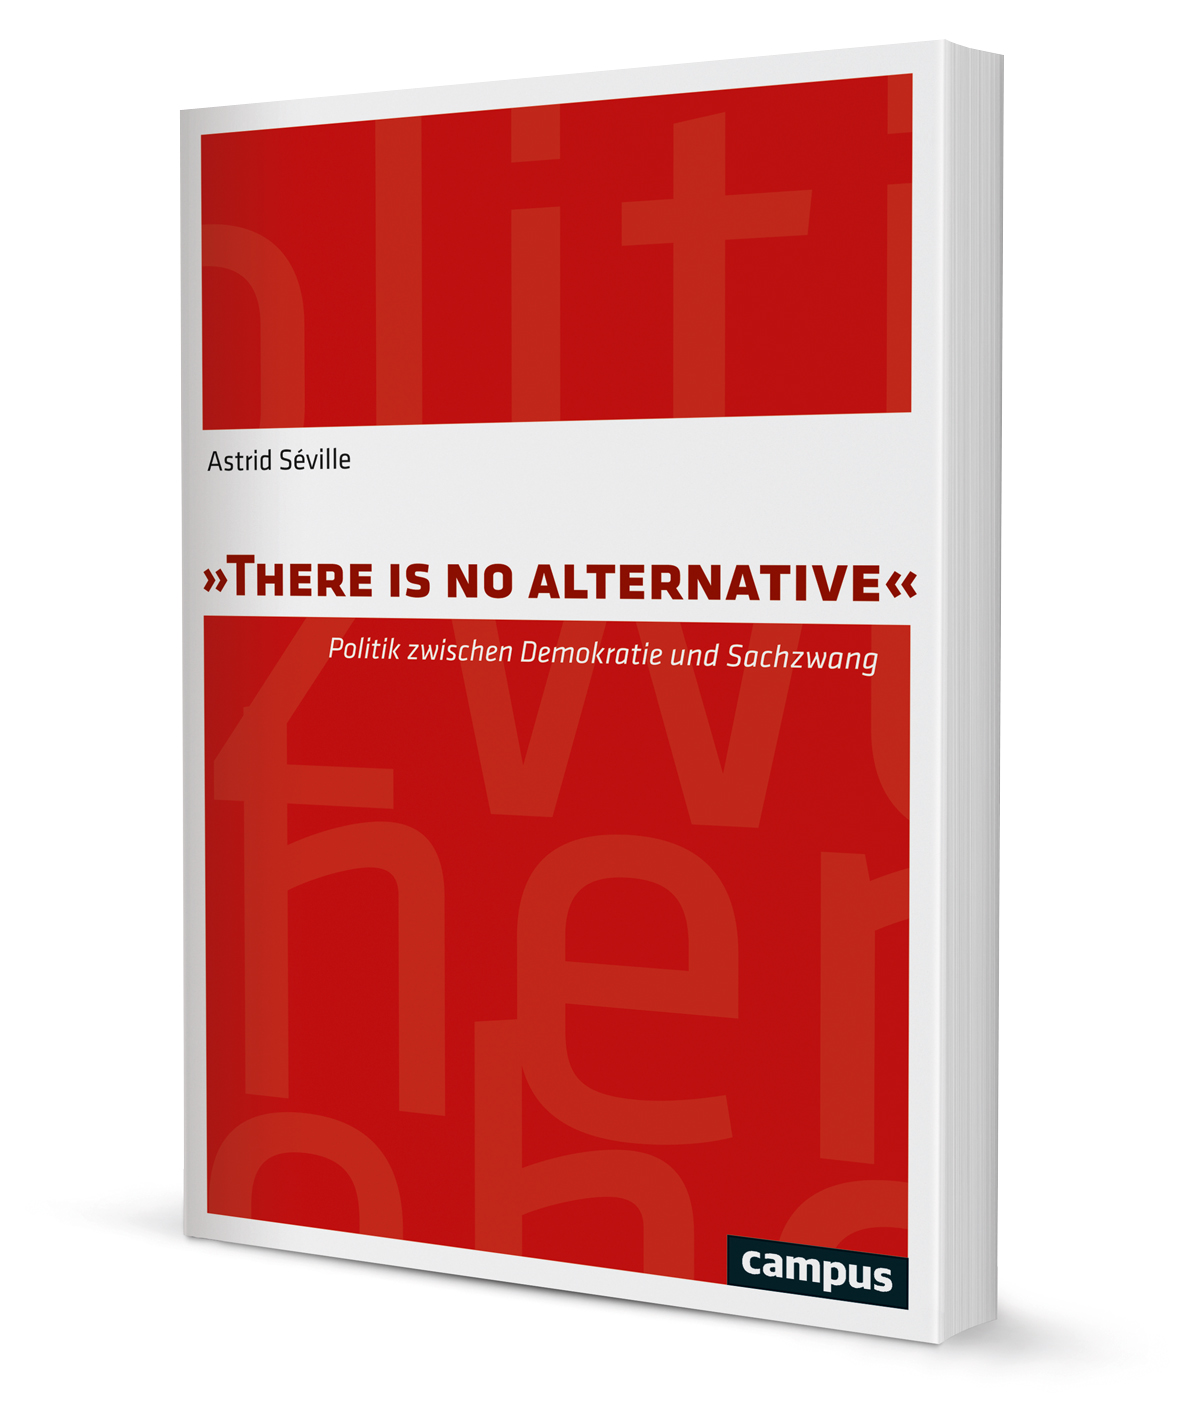 There is no alternative